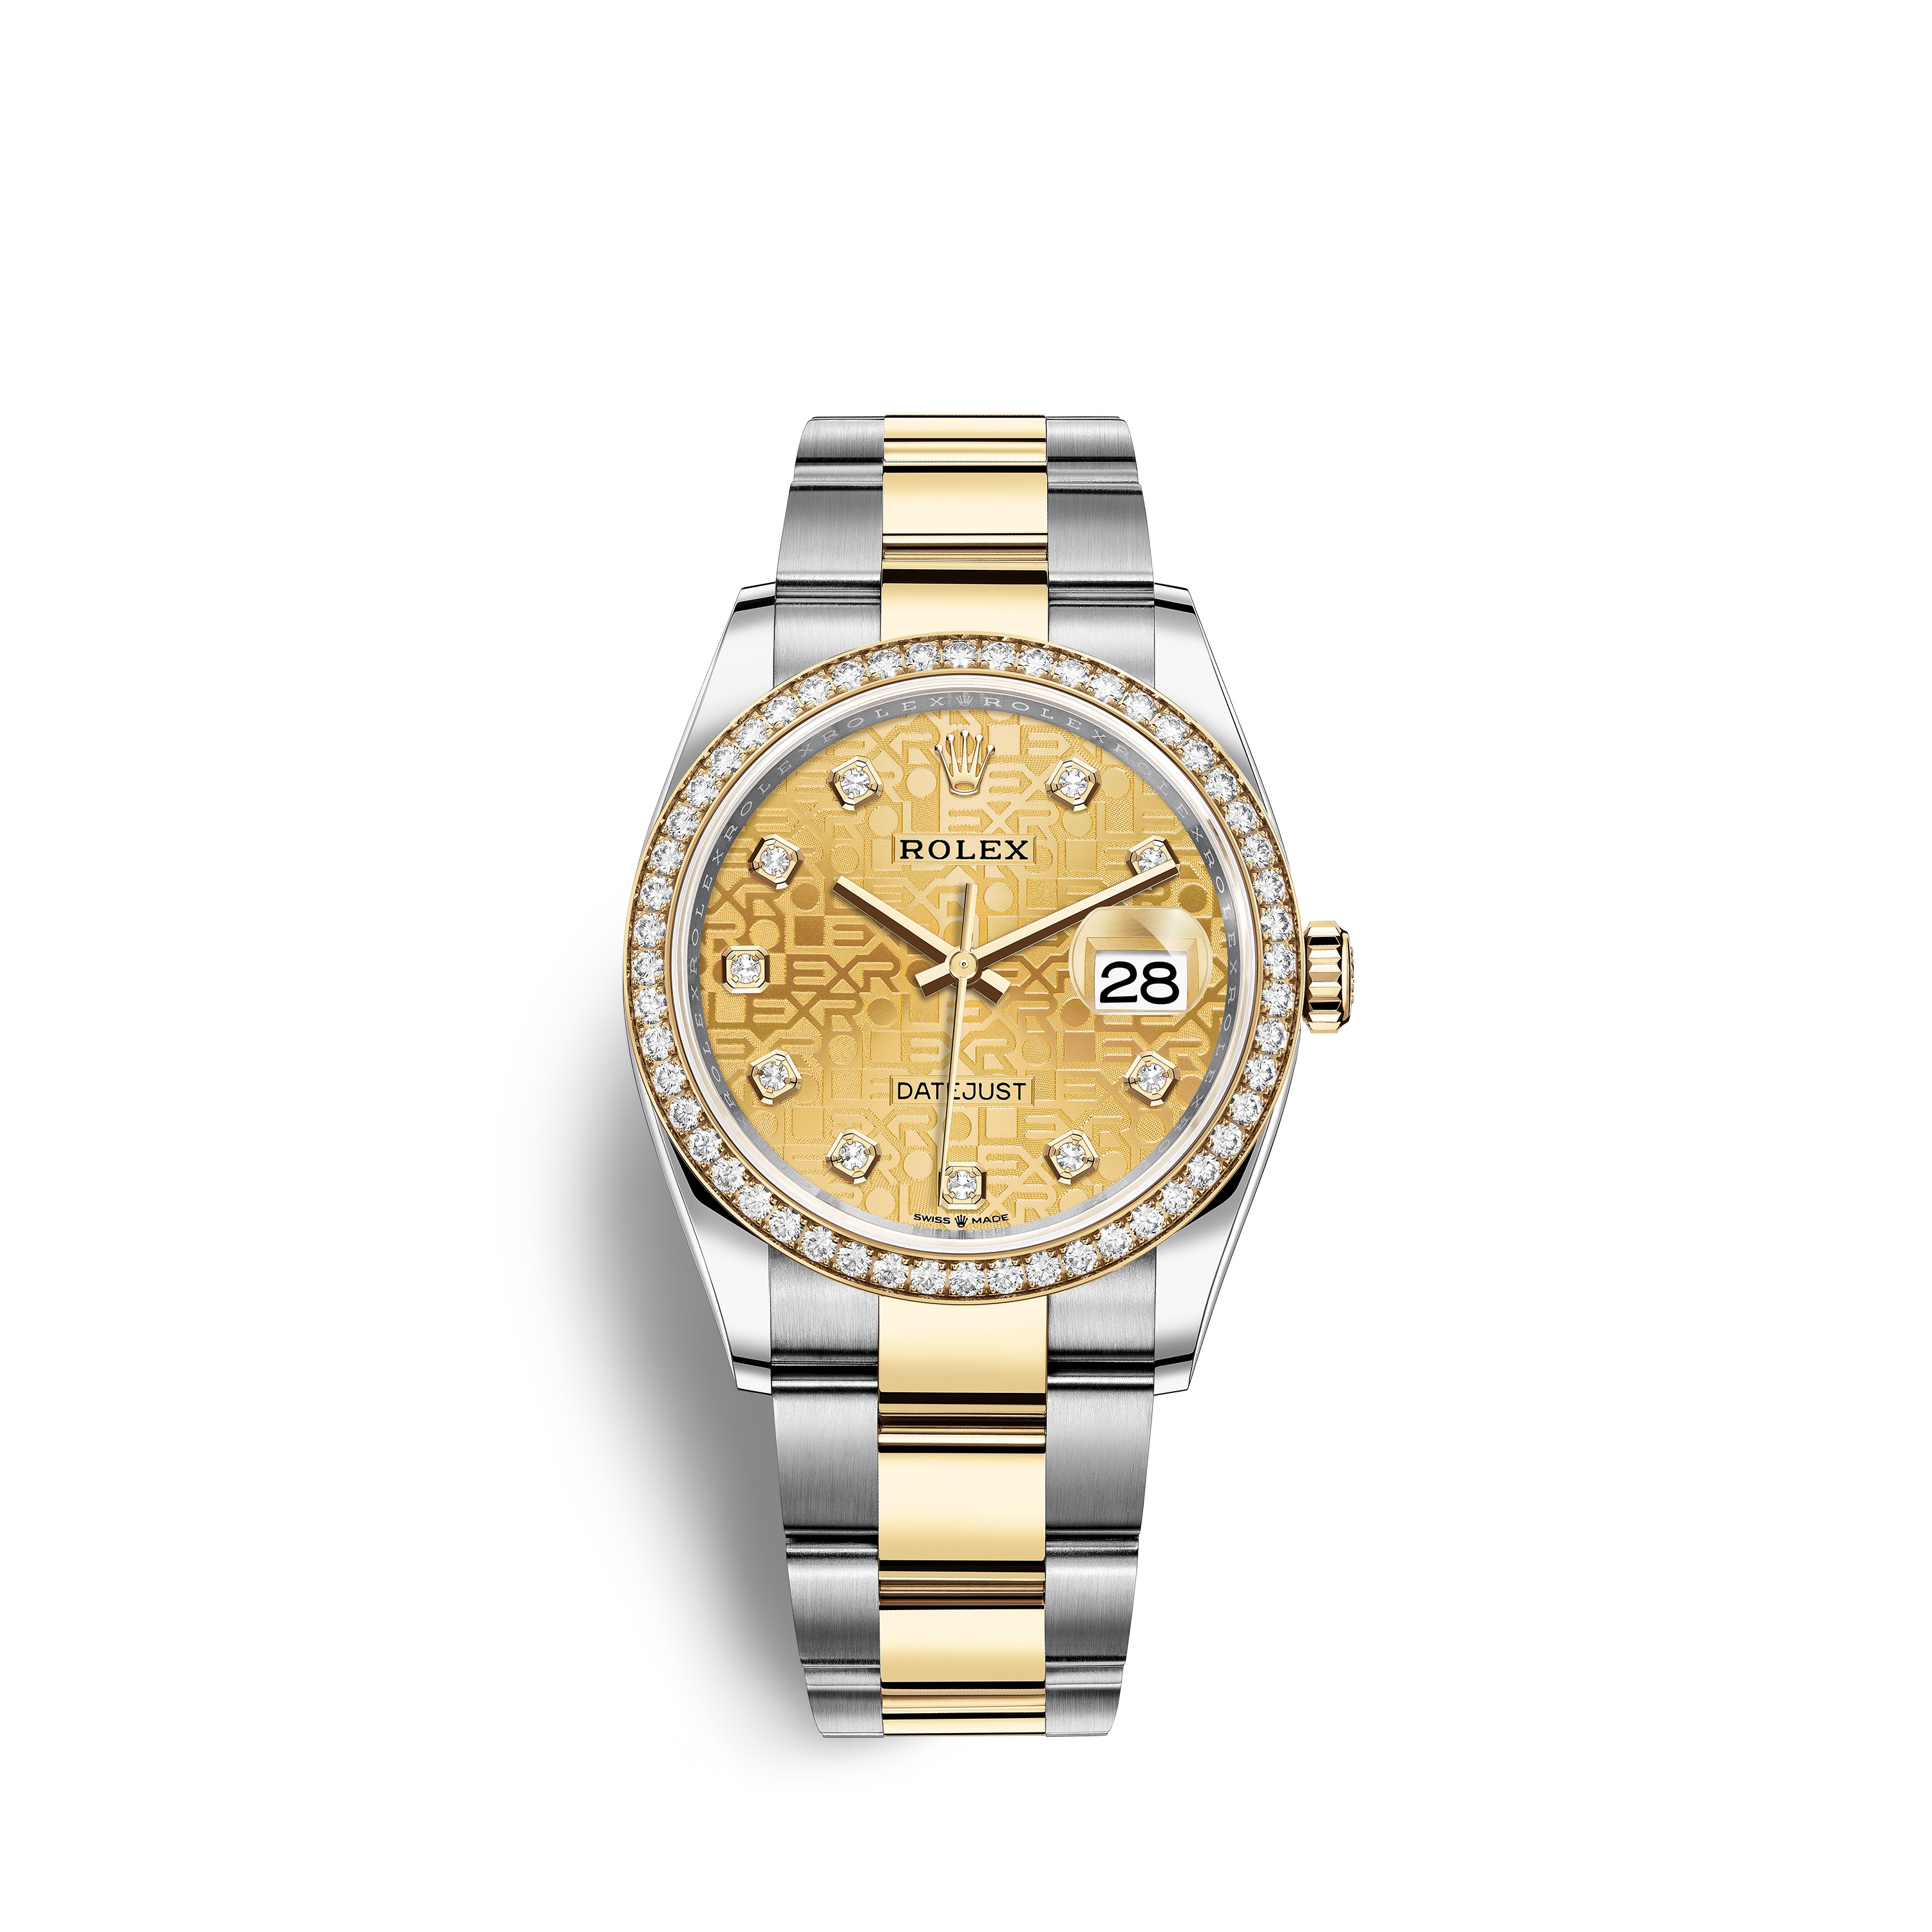 Datejust 36 126283RBR Gold, Stainless Steel & Diamonds Watch (Champagne-Colour Set with Diamonds)